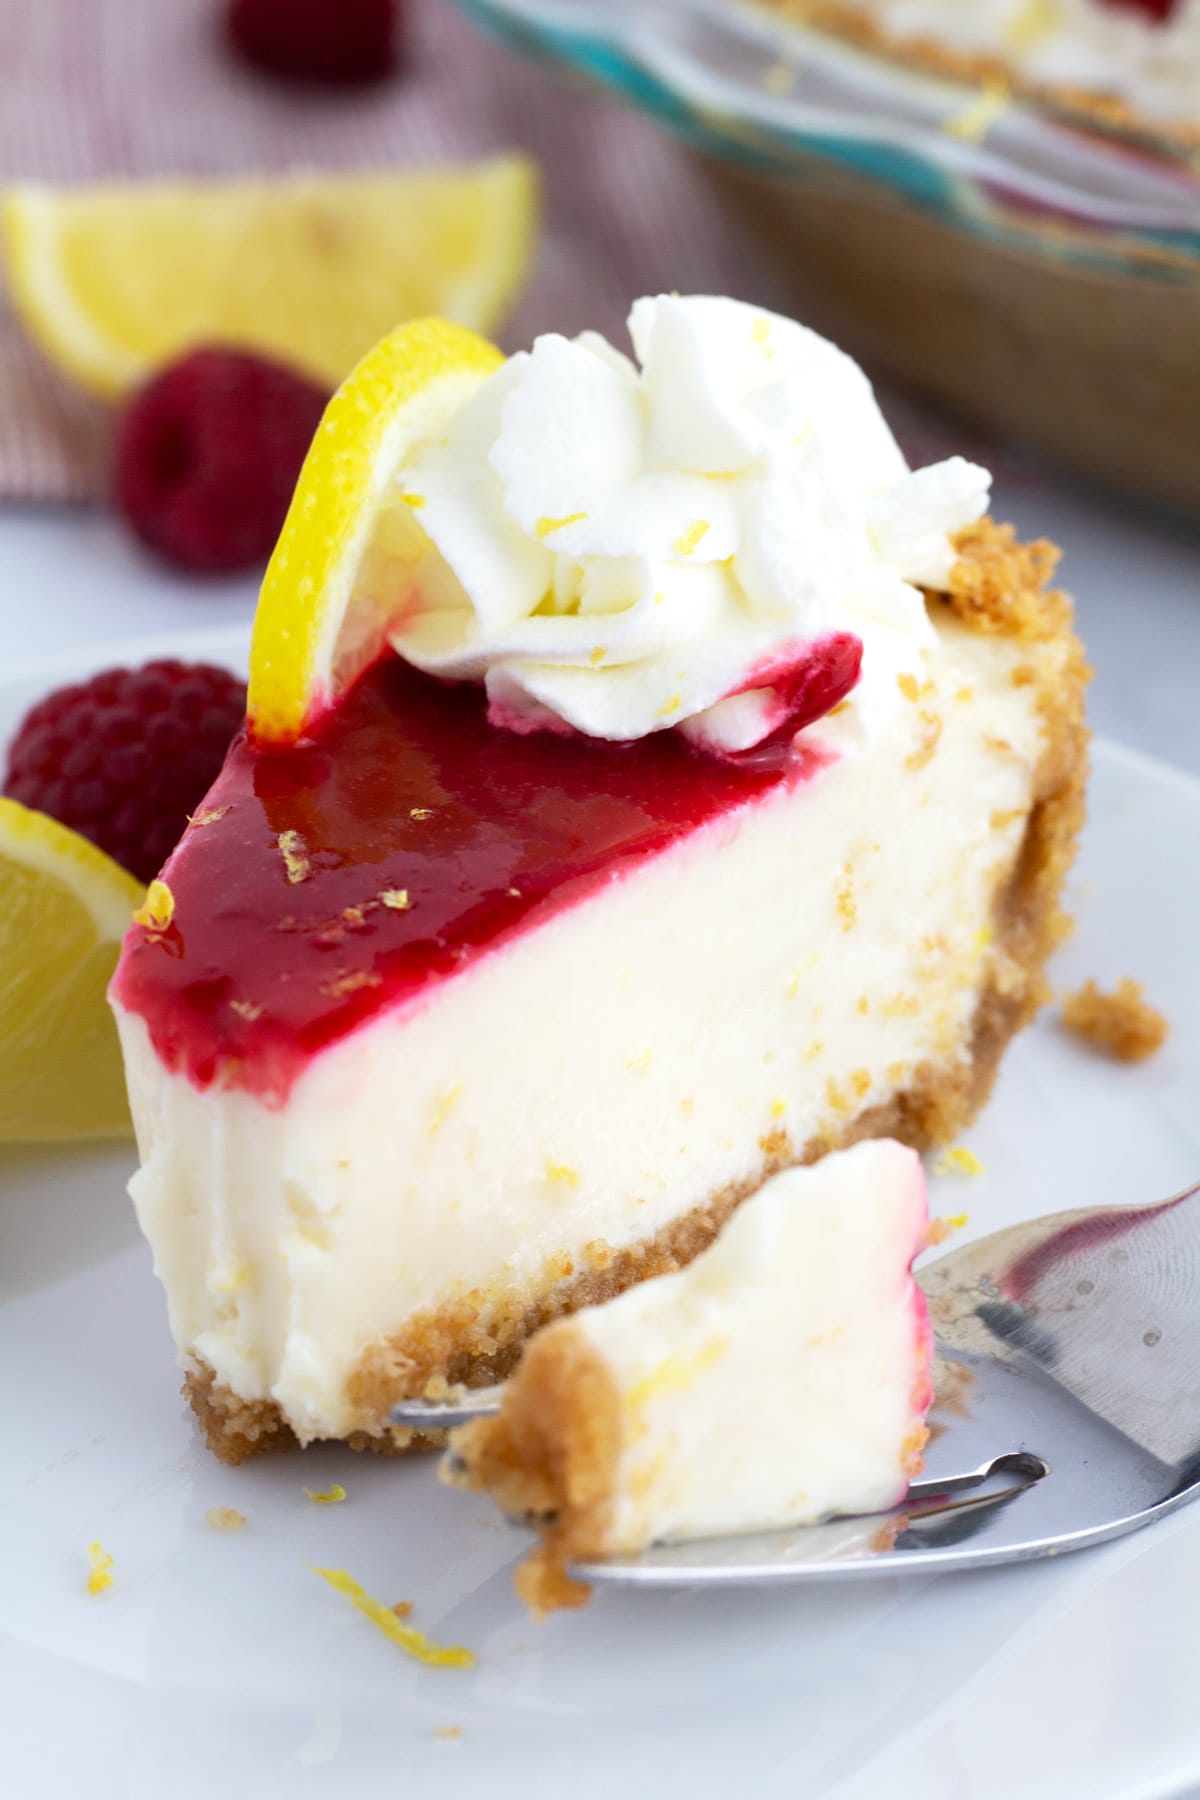 Slice of raspberry lemon pie on white plate with a fork on the side and lemon slices in the background.